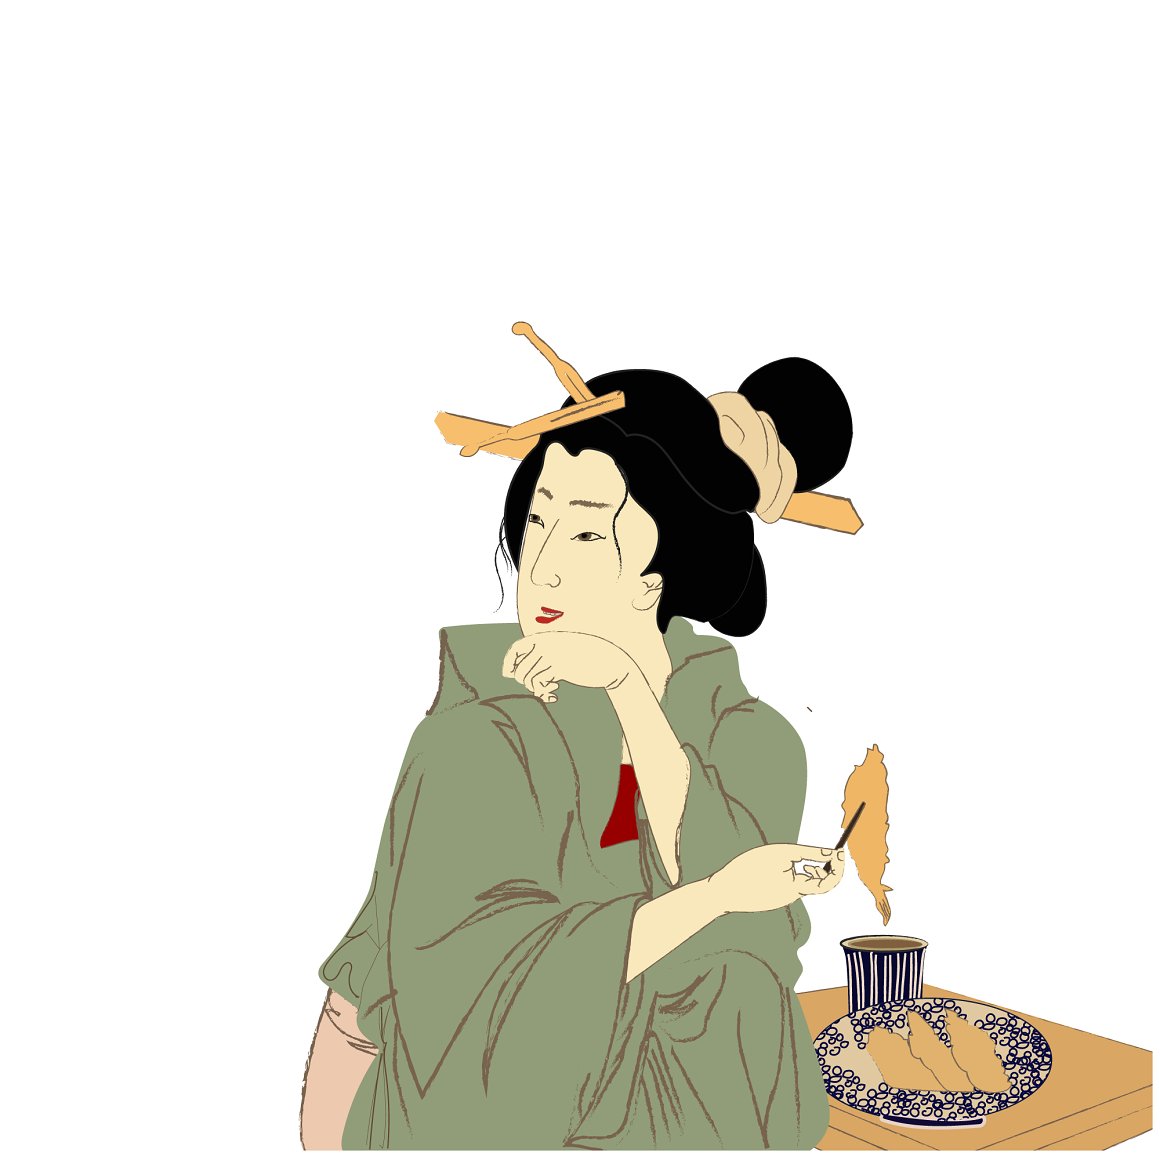 Illustration of a geisha in a kimono with black hair on a white background.